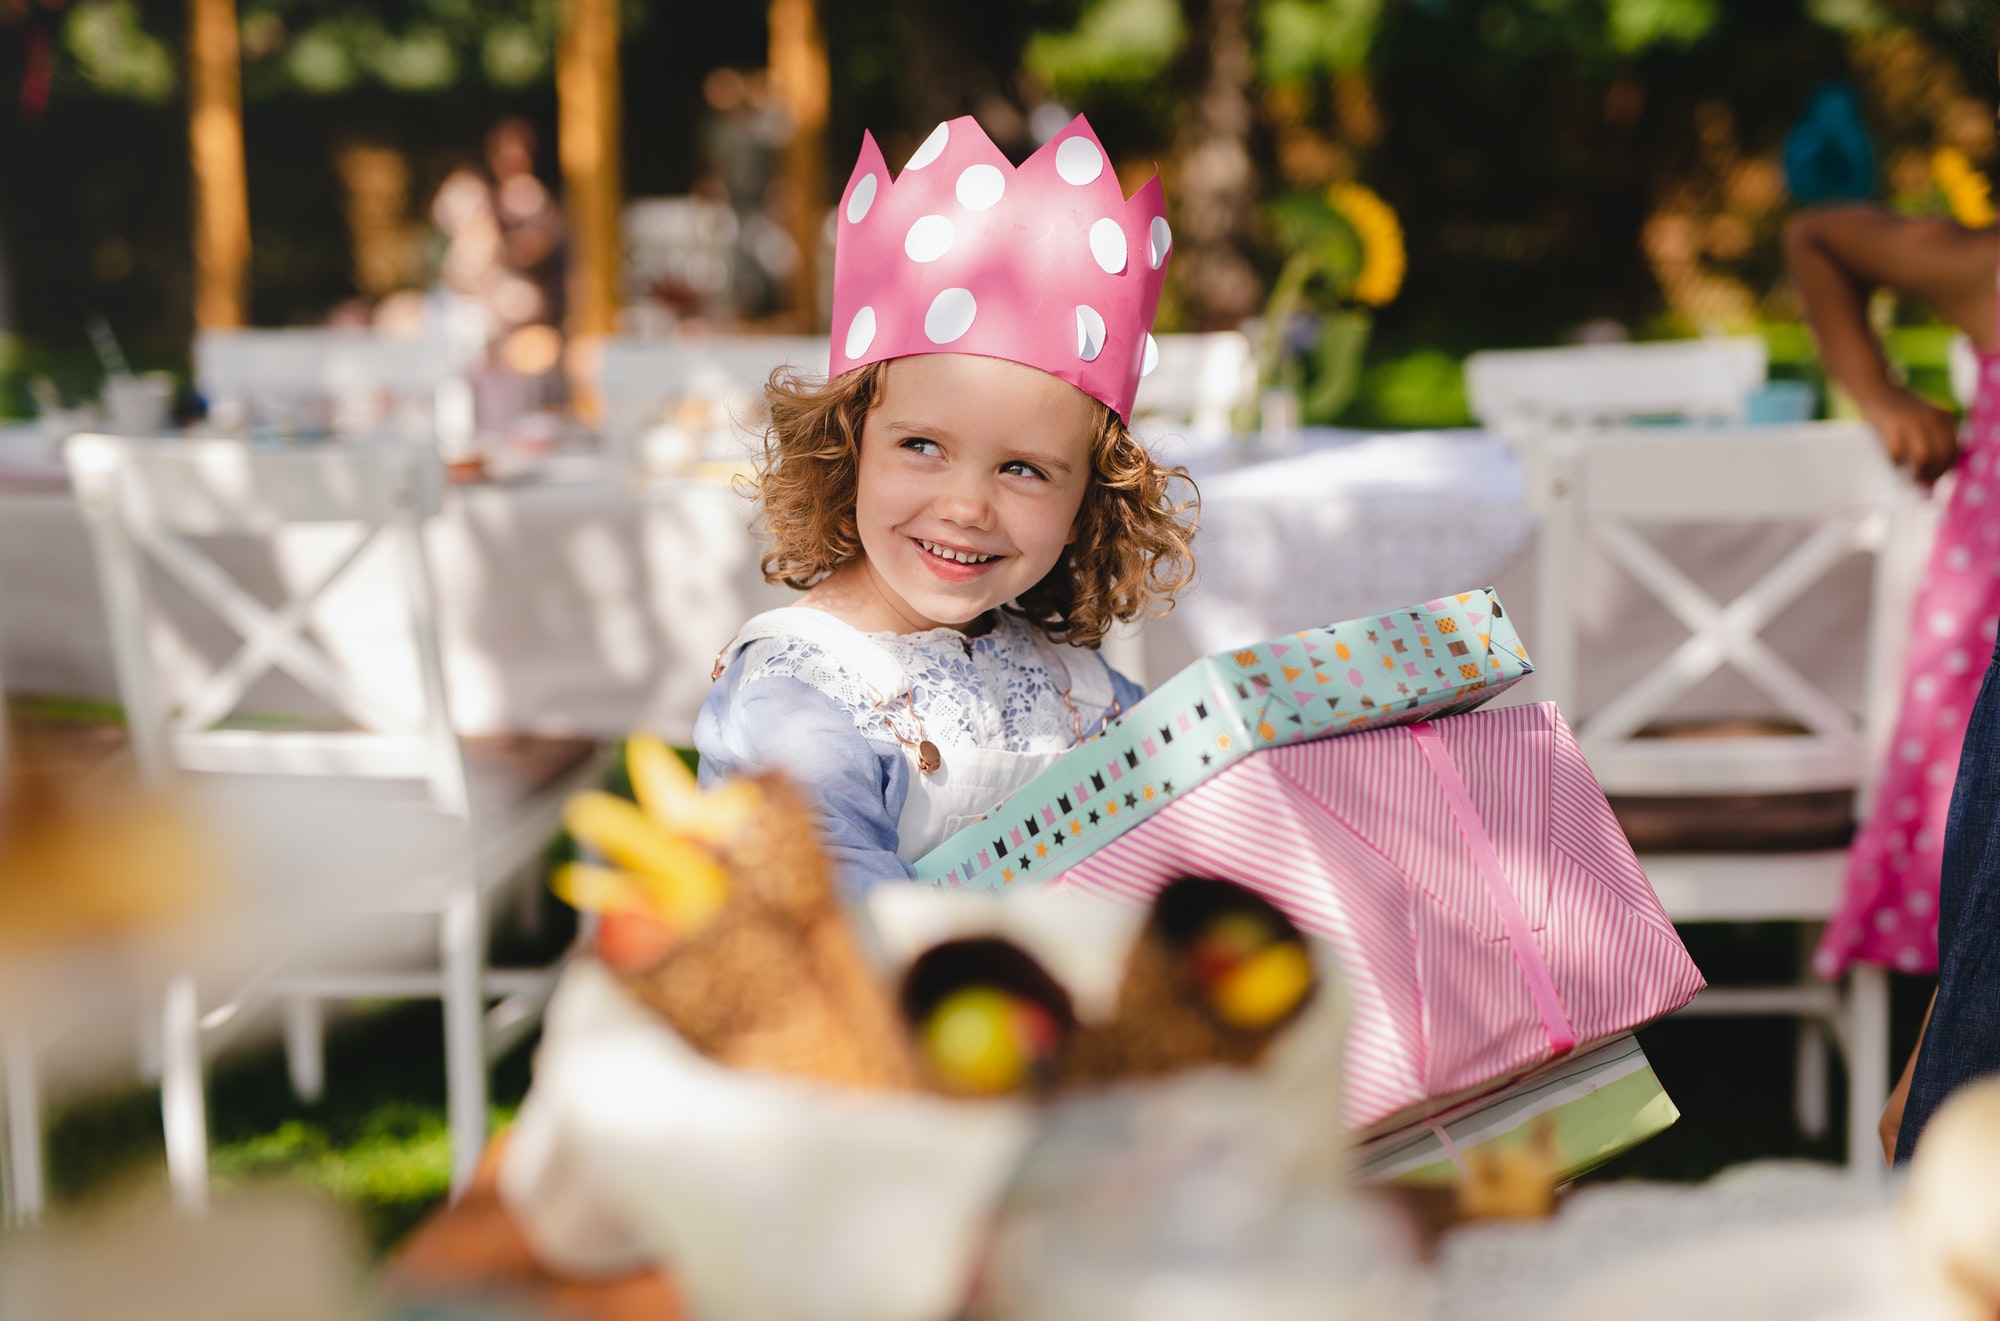 Small girl outdoors in garden in summer, holding presents